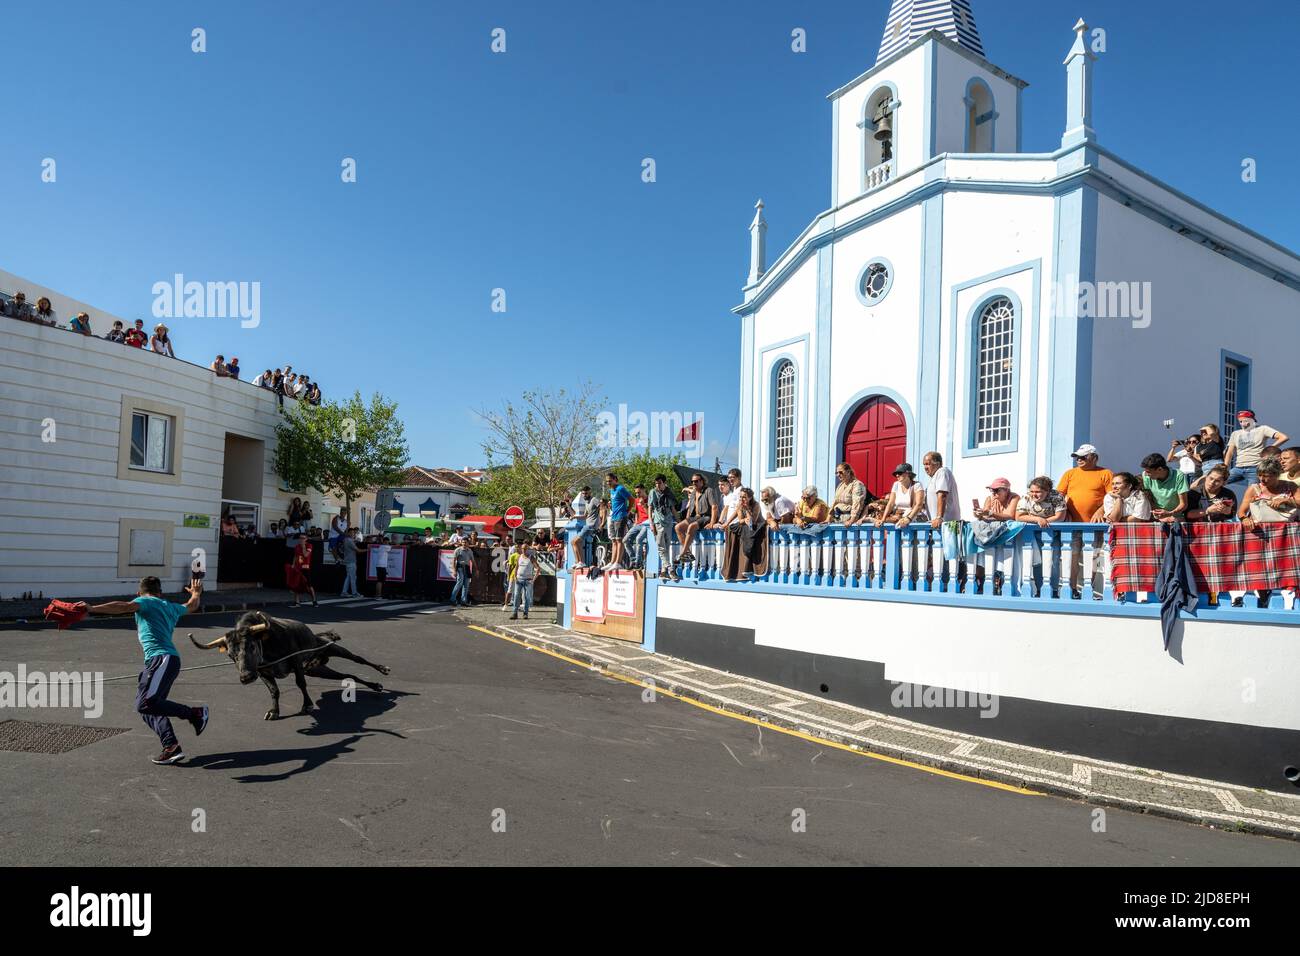 A bull chases a capinha or amateur bullfighter during a tourada a corda, also called a bull-on-a-rope at the Sanjoaninas festival, June 18, 2022 in Angra do Heroísmo, Terceira Island, Azores, Portugal. During the uniquely Azorean event a bull tied to a long rope runs loose as participants attempt to distract or run from the bull. Stock Photo